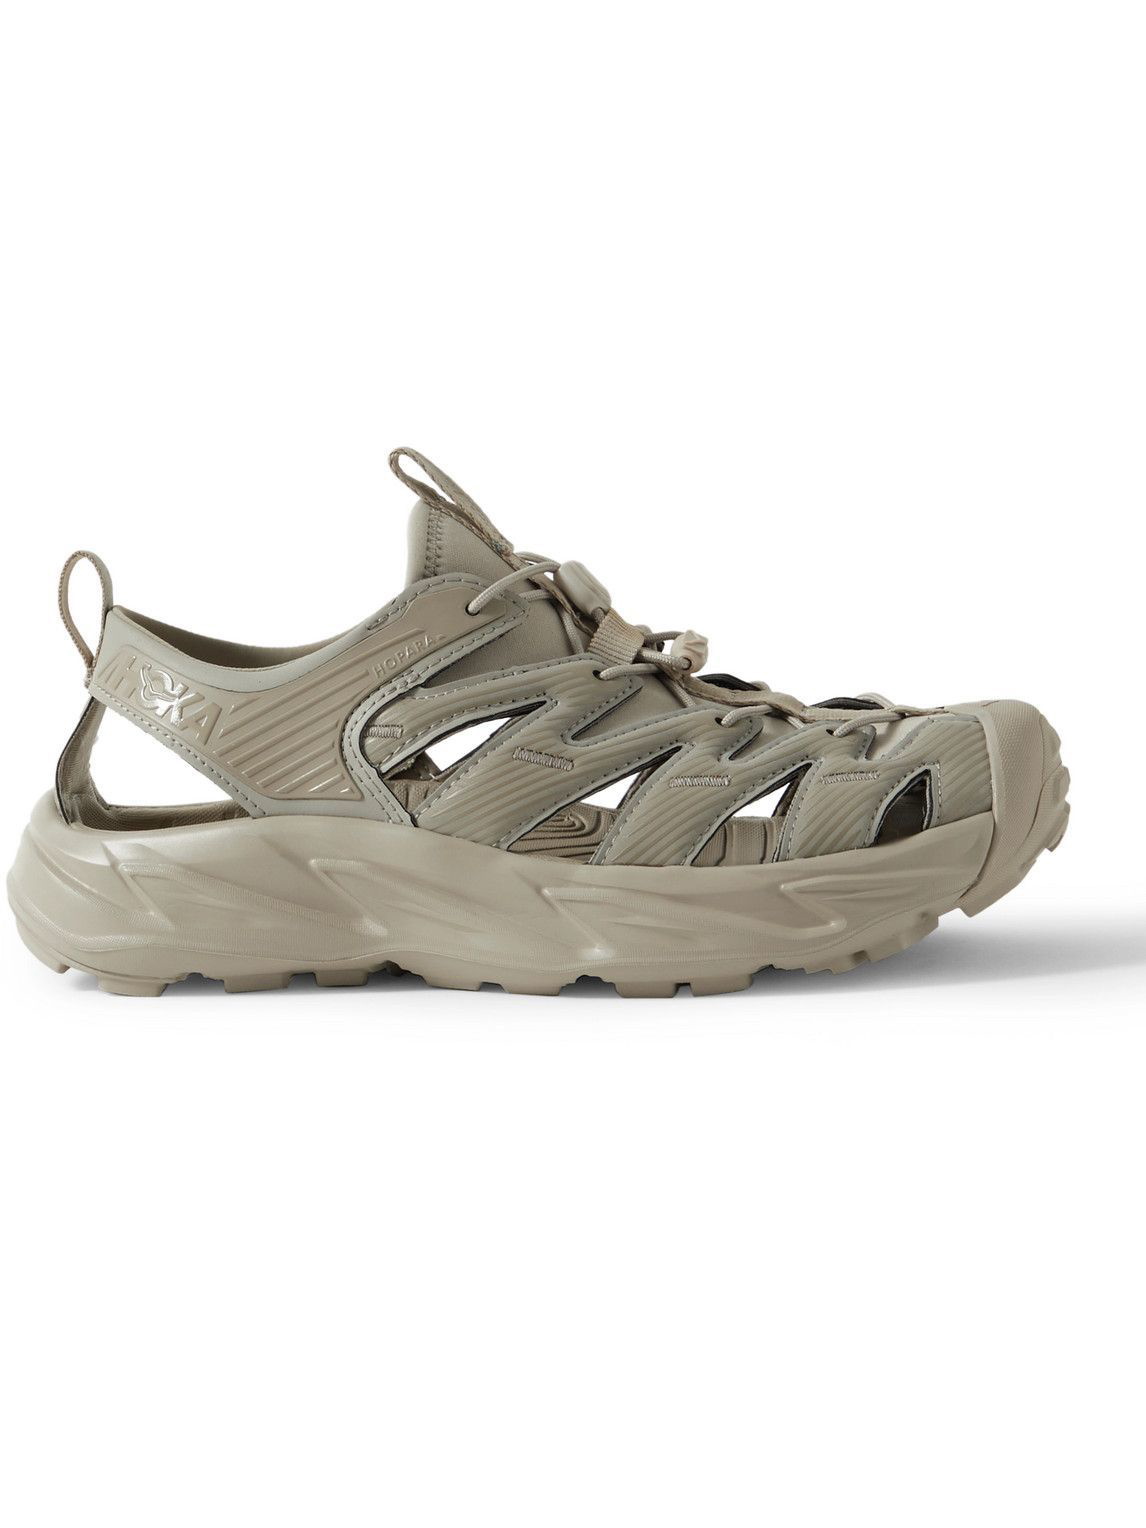 Hoka One One - Hopara Rubber-Trimmed Faux Leather and Neoprene Hiking ...